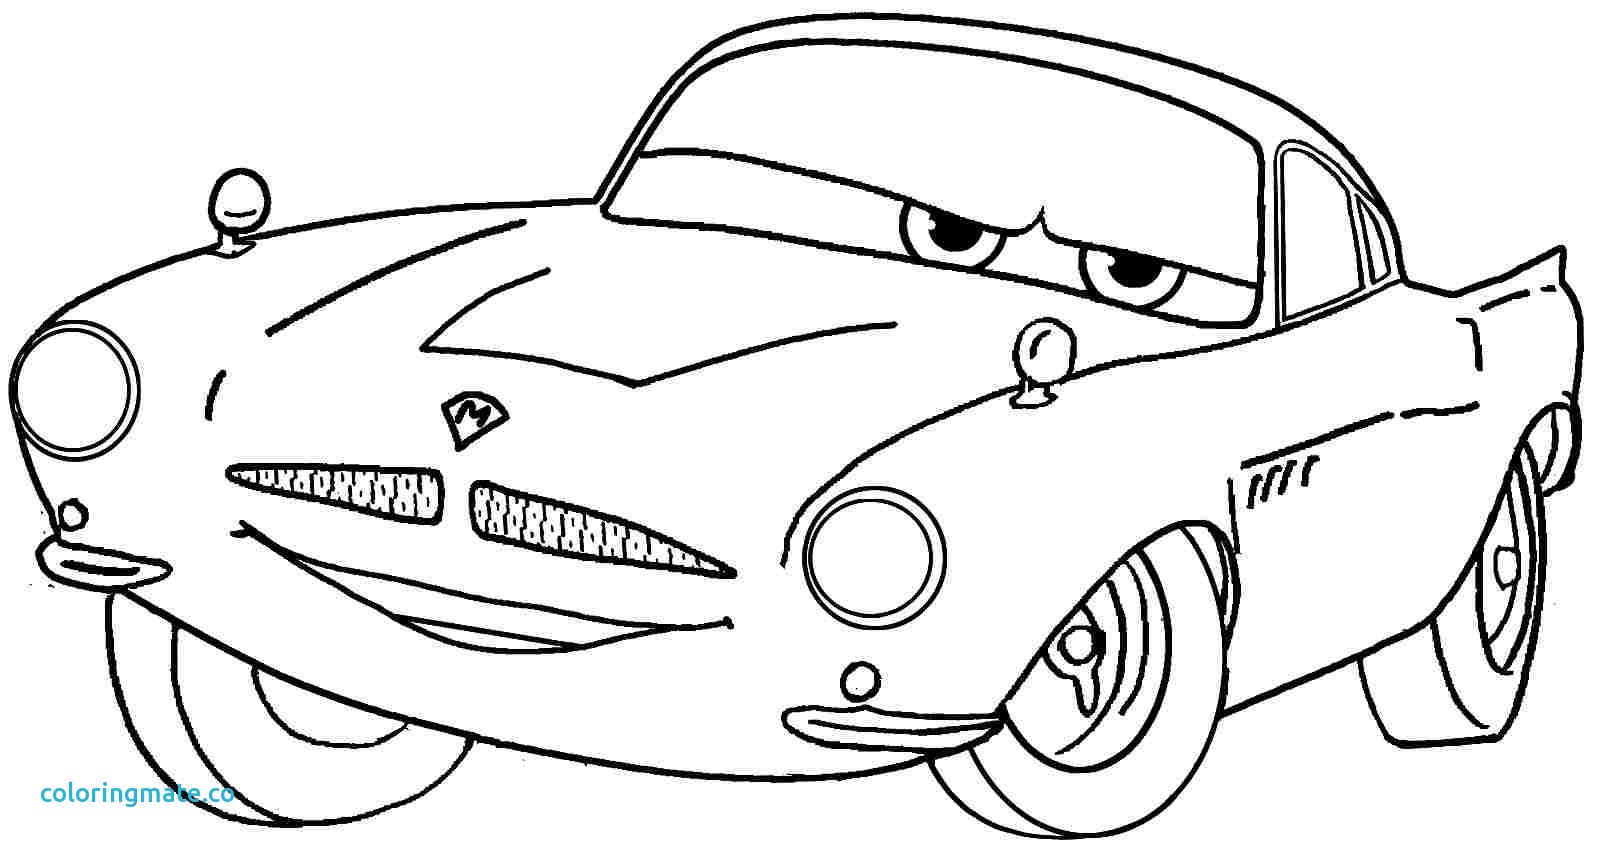 Cars Coloring Pages Pdf at GetColorings.com | Free ...